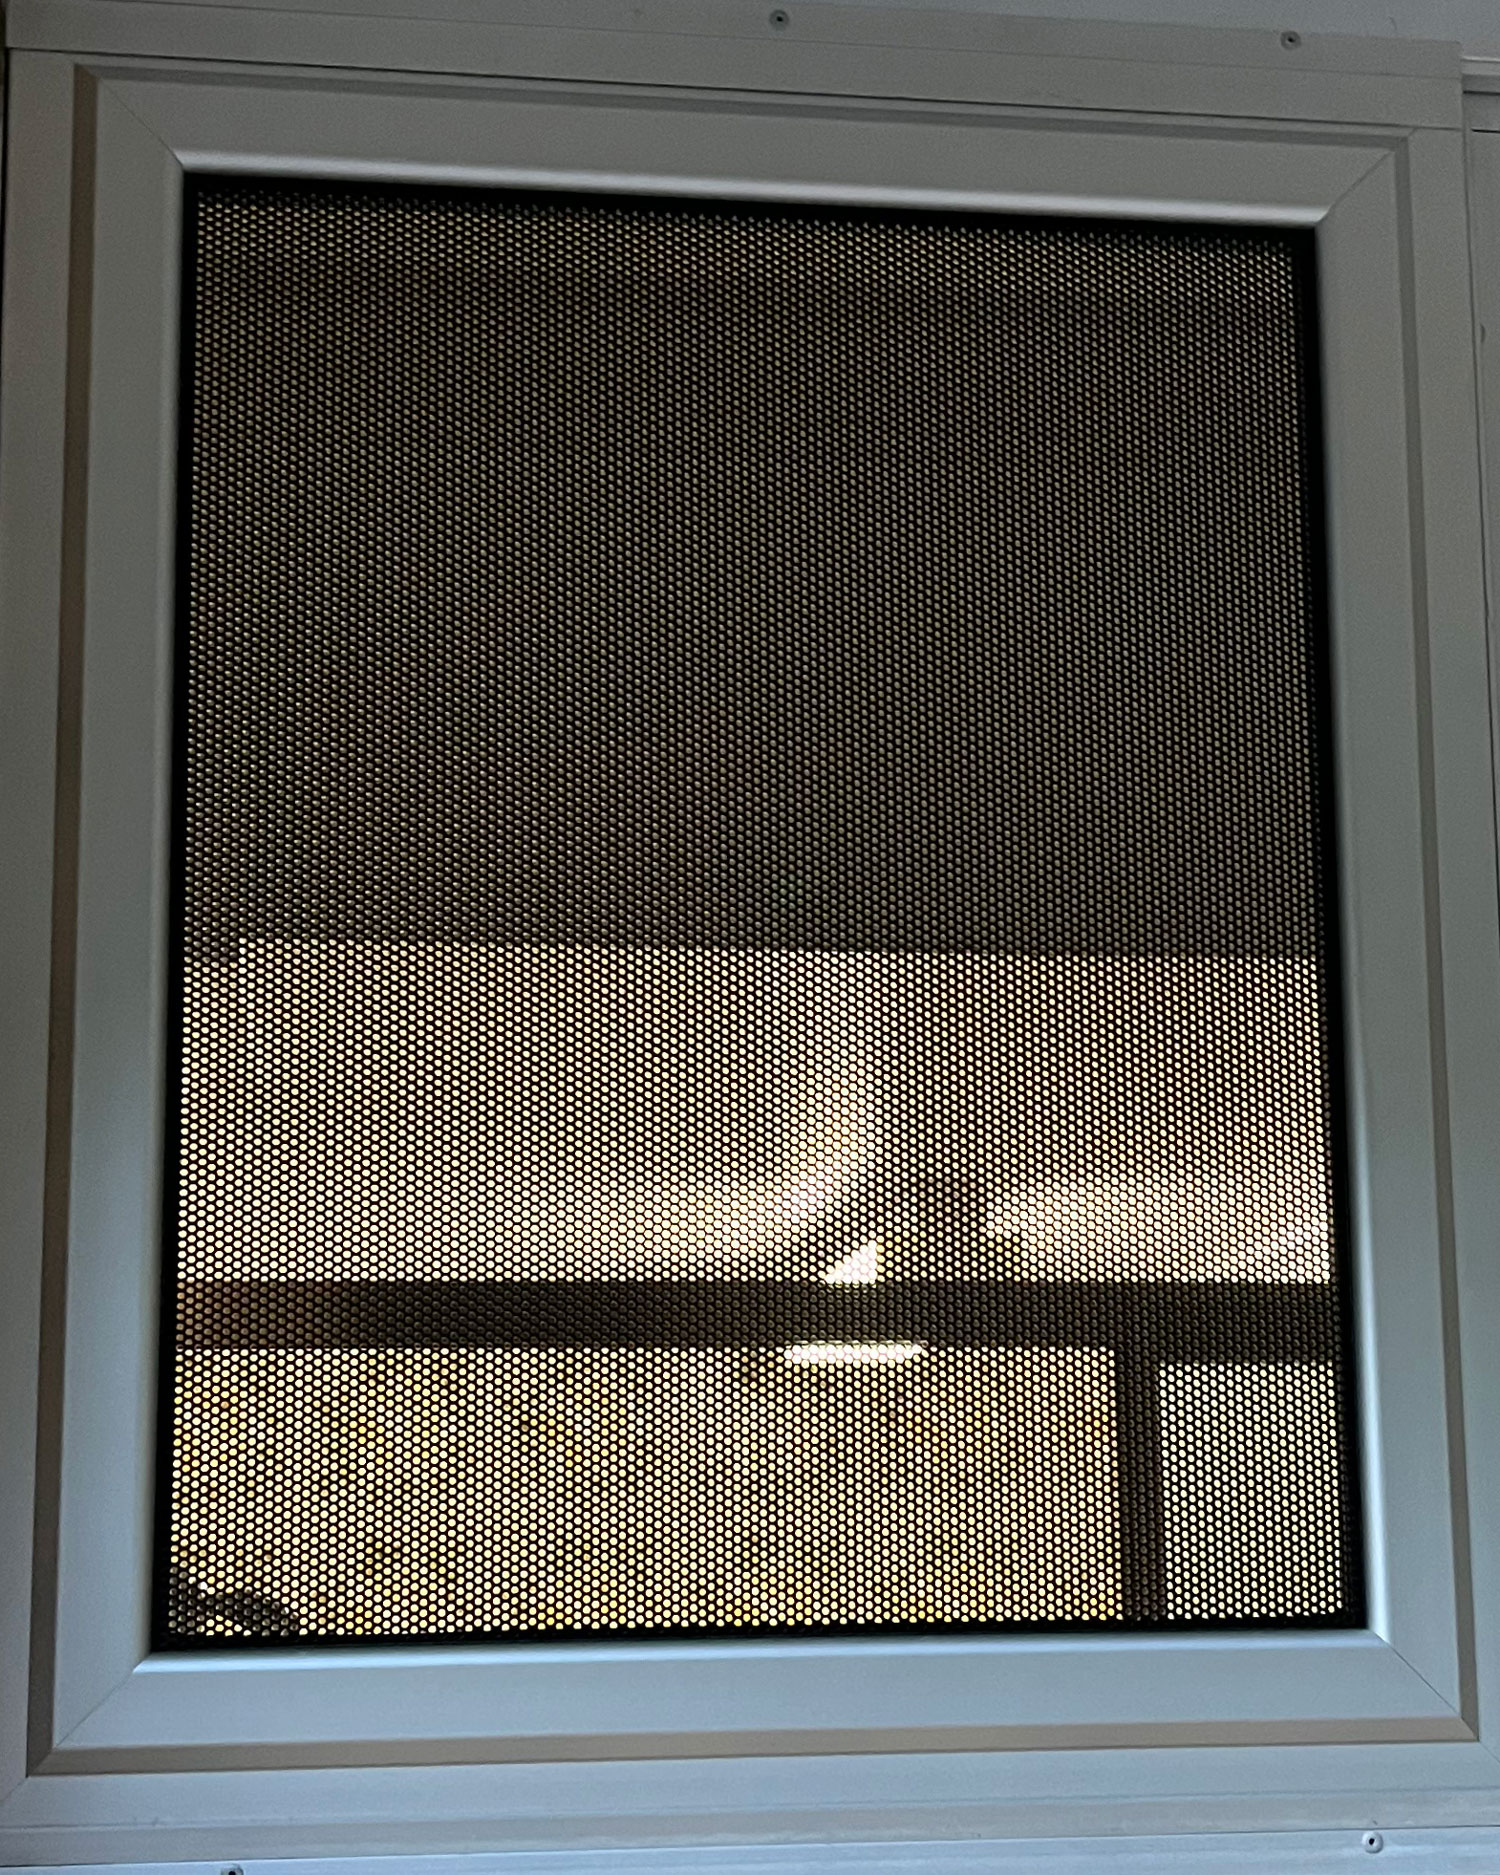 Perforated budget security screen window